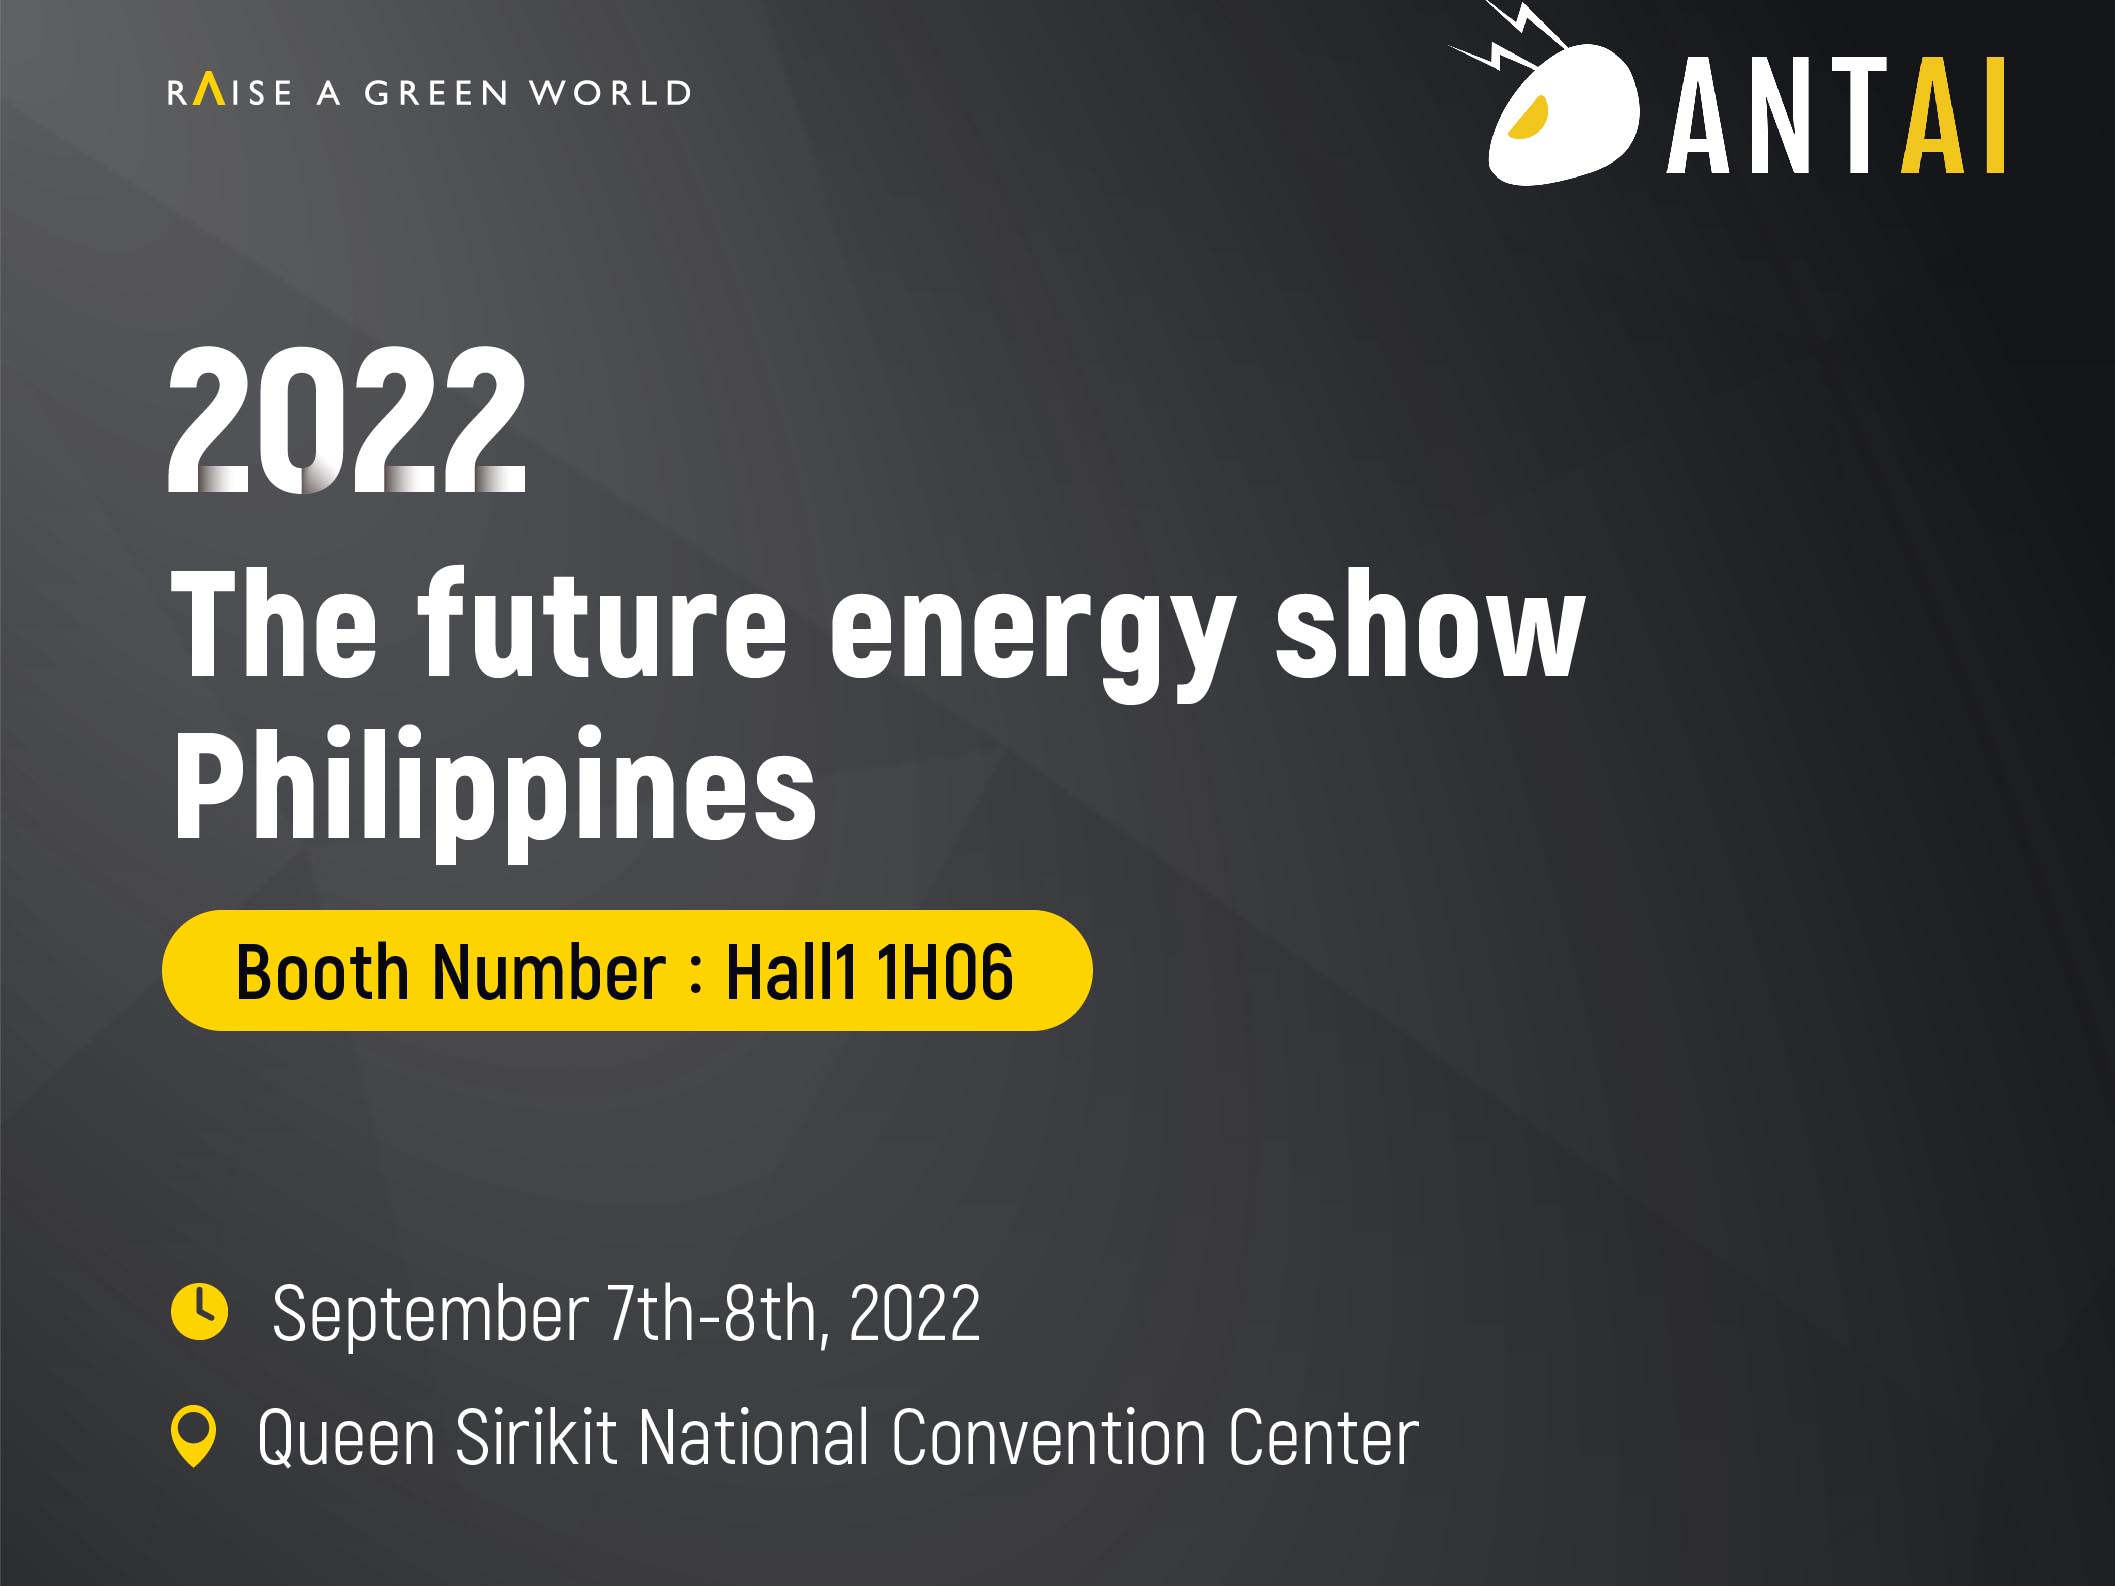 Antaisolar sincerely awaits your presence at The Future Energy Show Philippines 2022